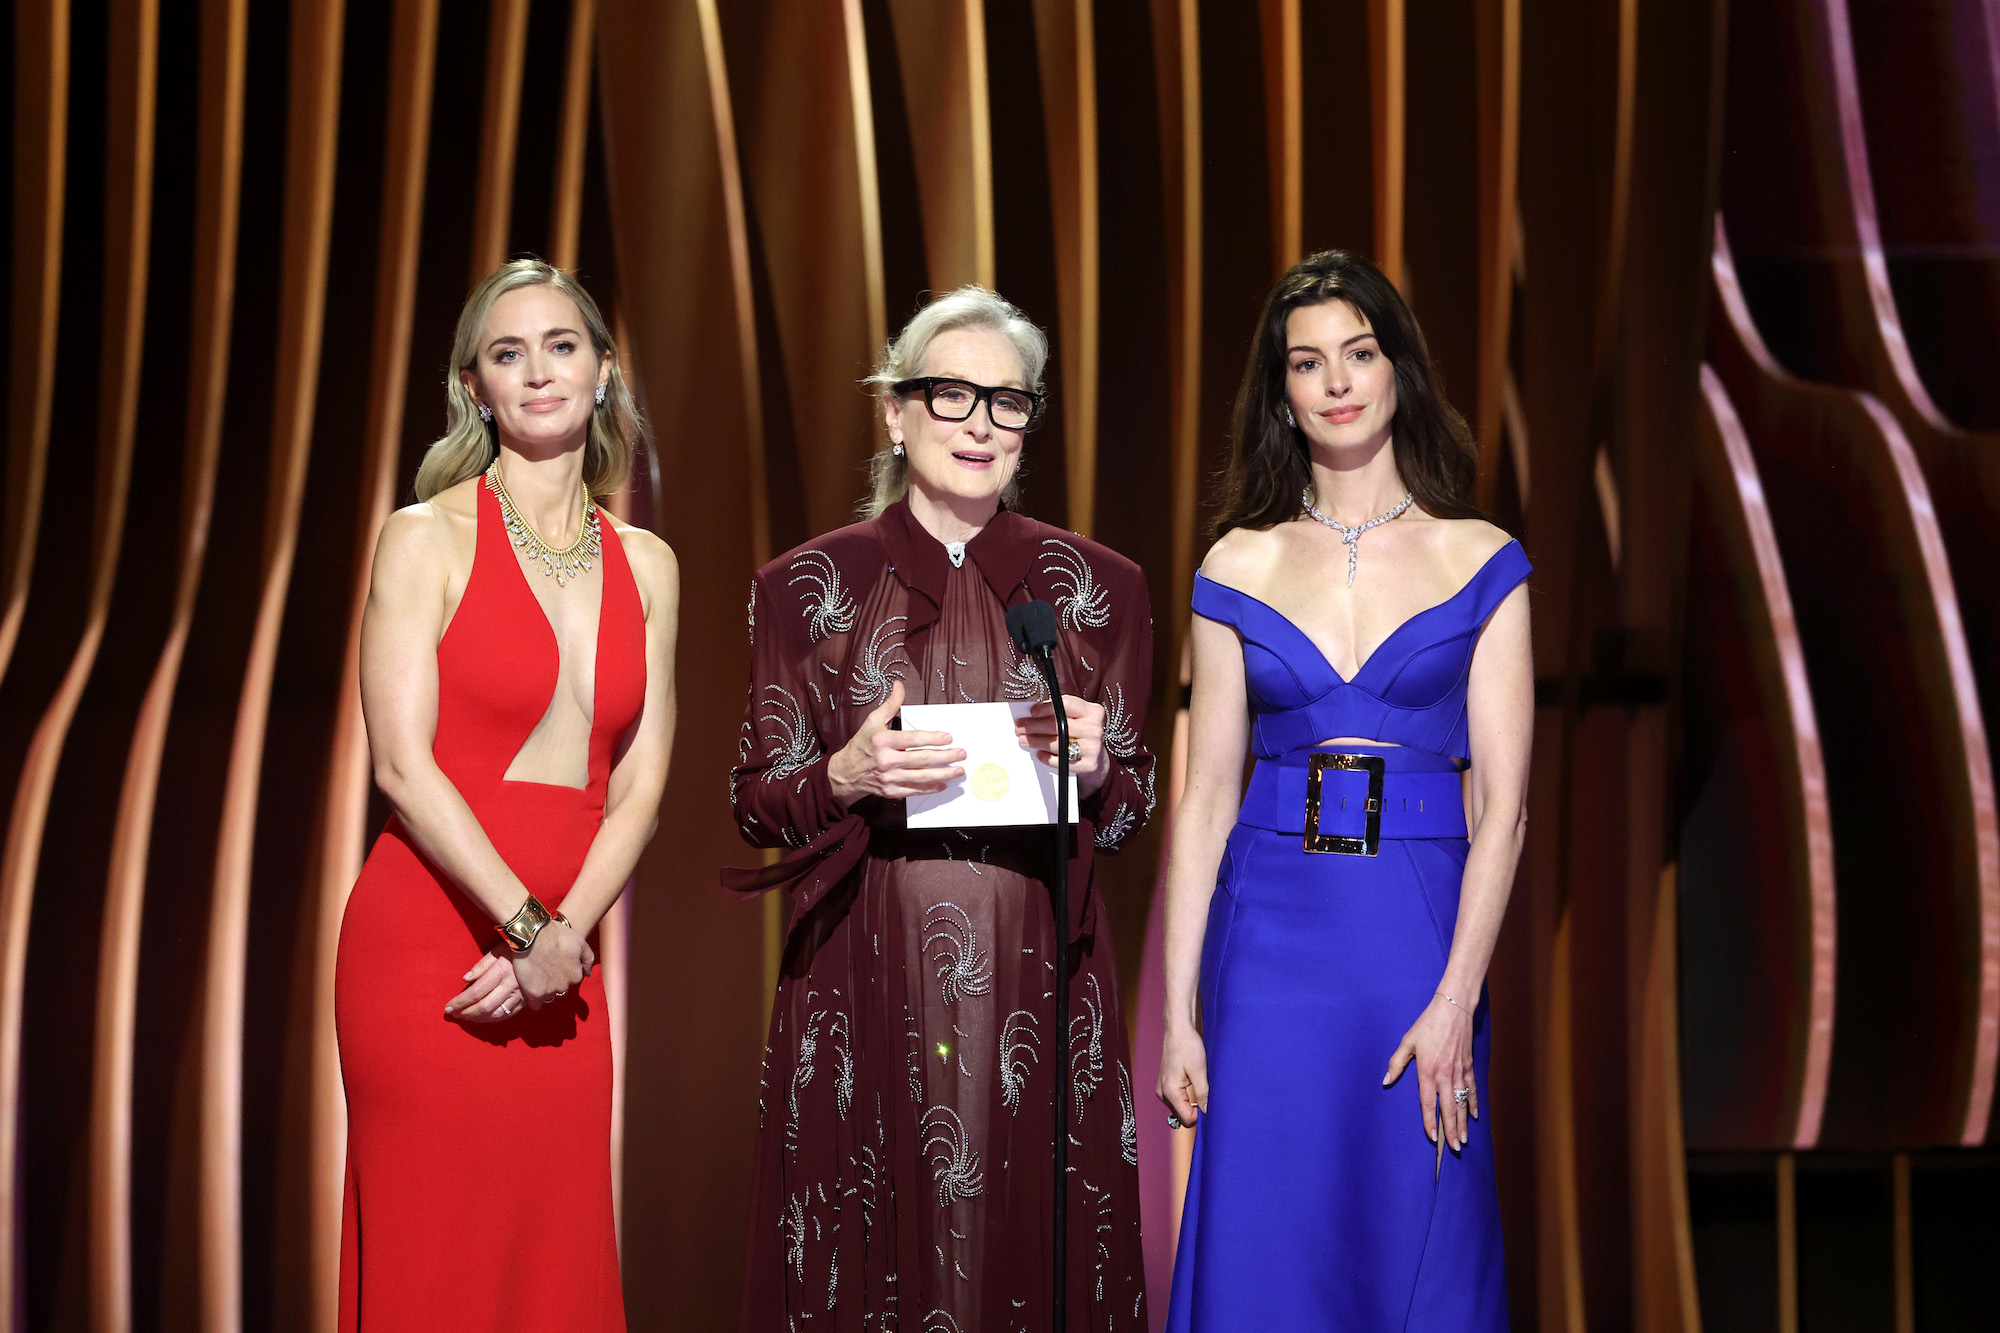 Anne Hathaway, Meryl Streep and Emily Blunt Reunite at the SAG Awards